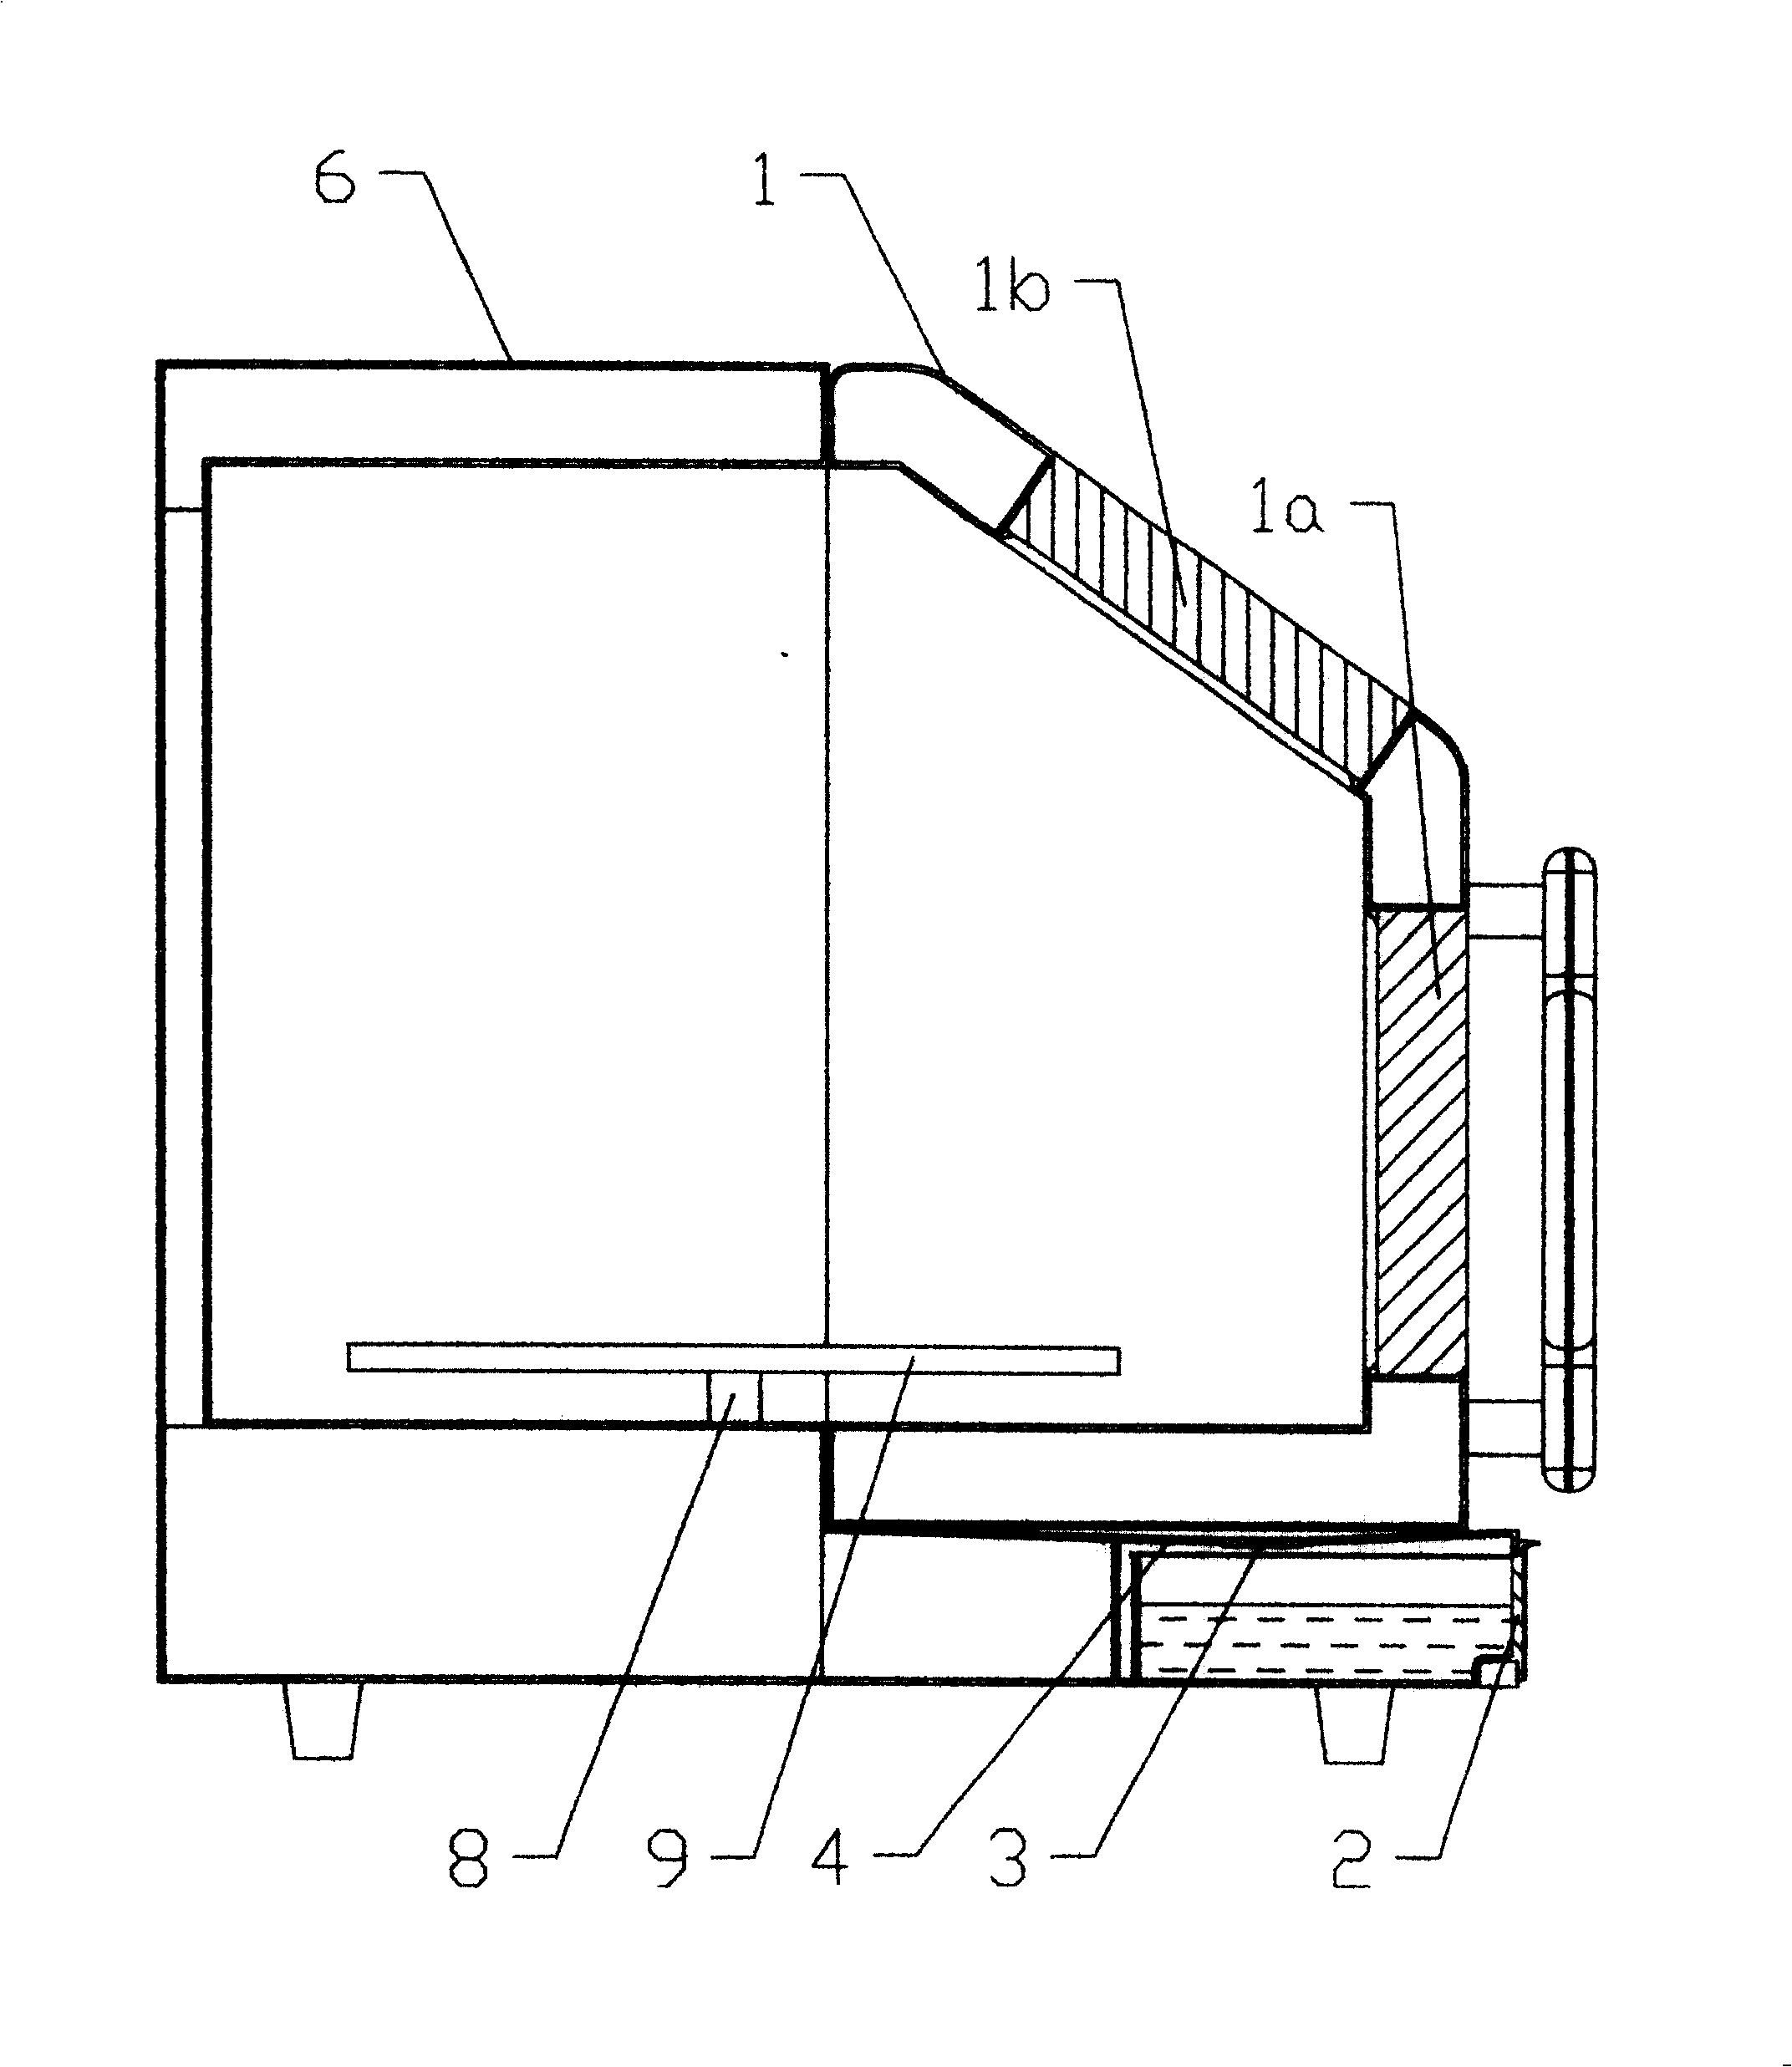 Enclosed chamber of electromagnetic oven and double observation windows oven door thereof